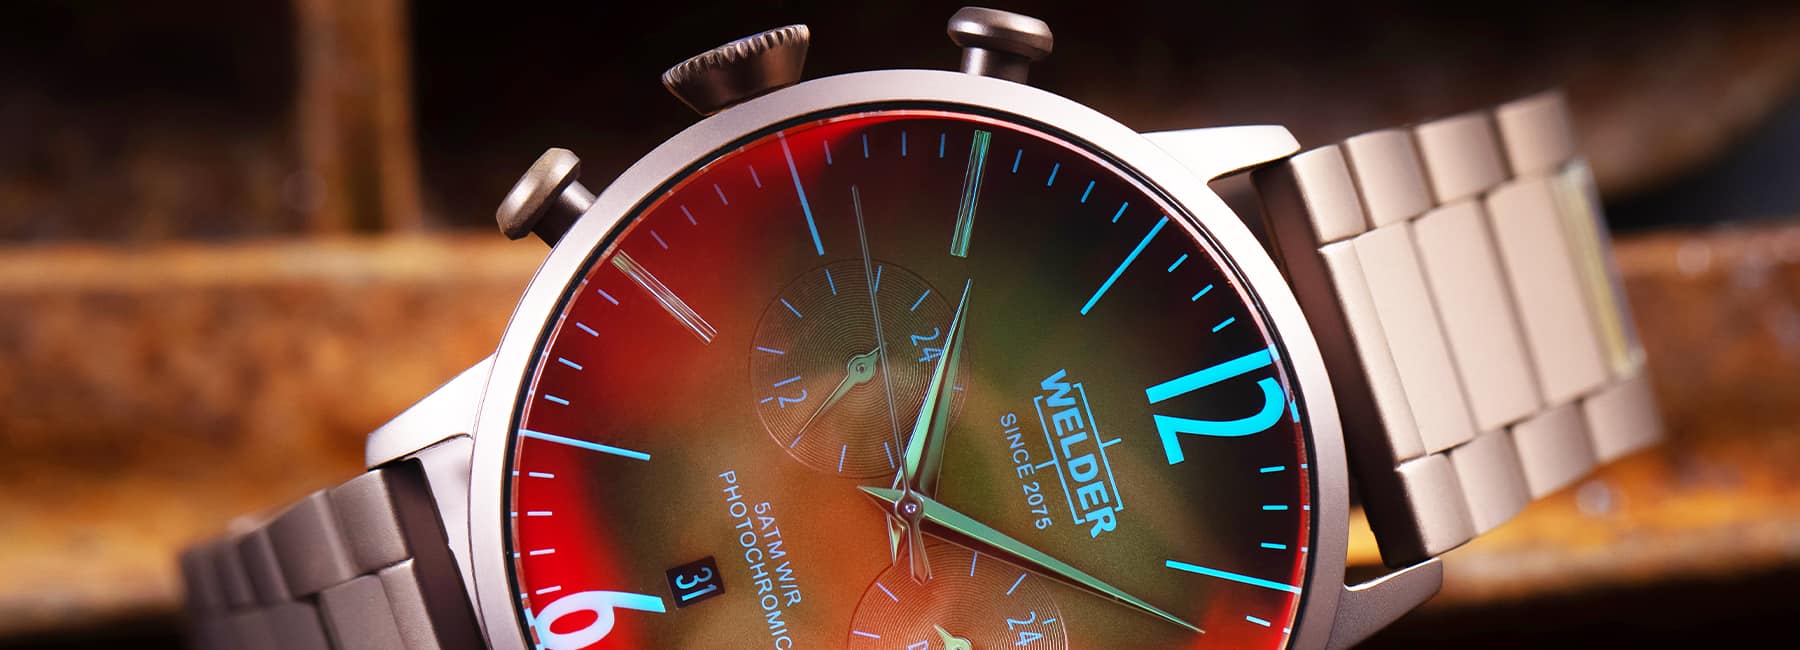 Time to Embrace Change with Your Welder Watch